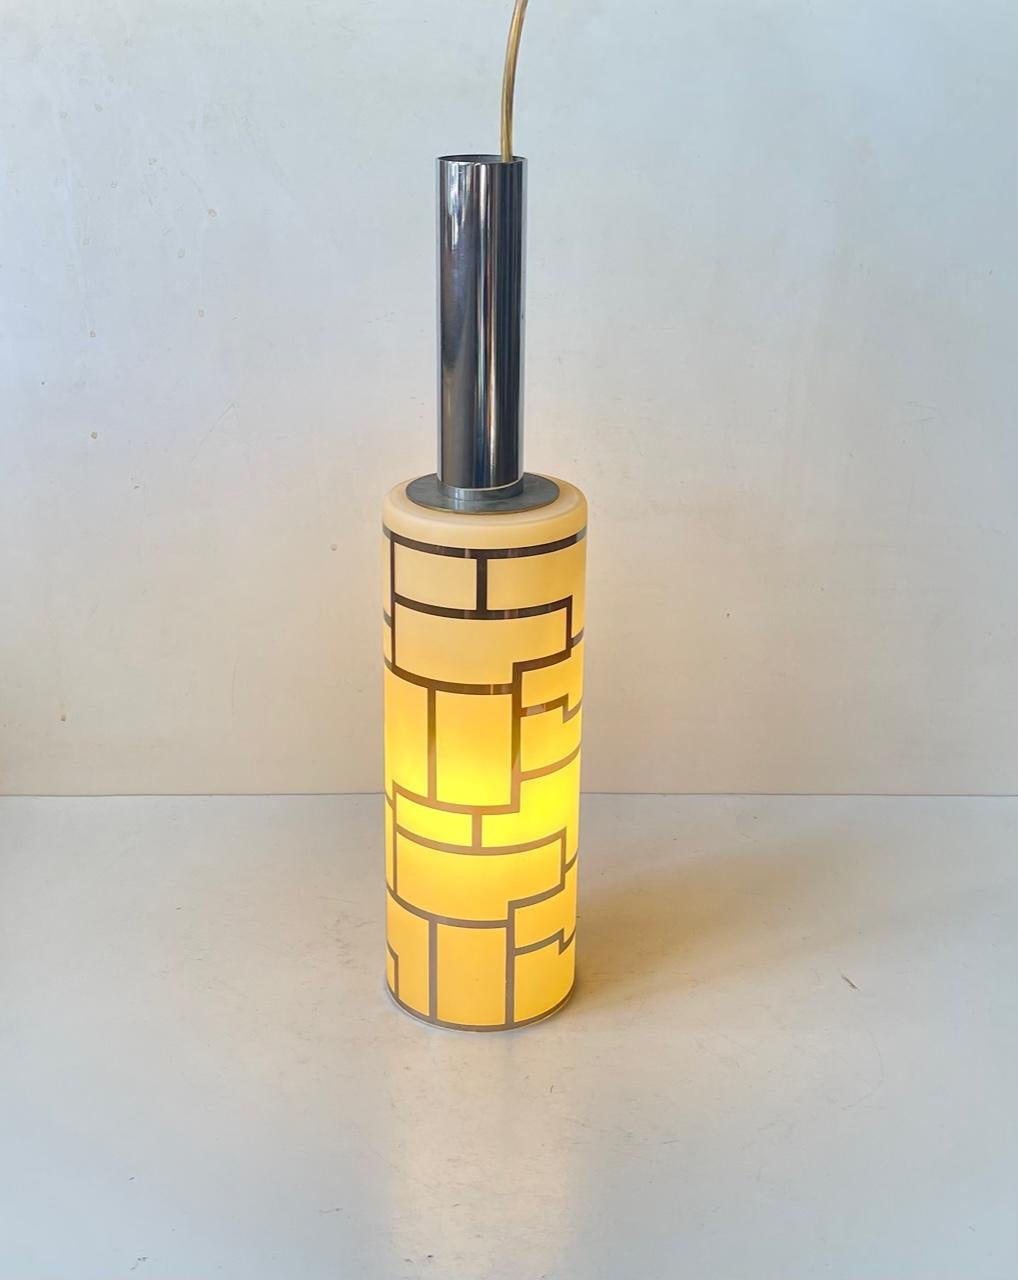 A mallet shaped hanging light featuring a cylindrical shade with cubist impressions/decor in chrome plating. Its top is made from chrome plated steel. Manufactured in Italy during the 1980s. Measurements: H: 43 cm, Diameter: 10 cm.